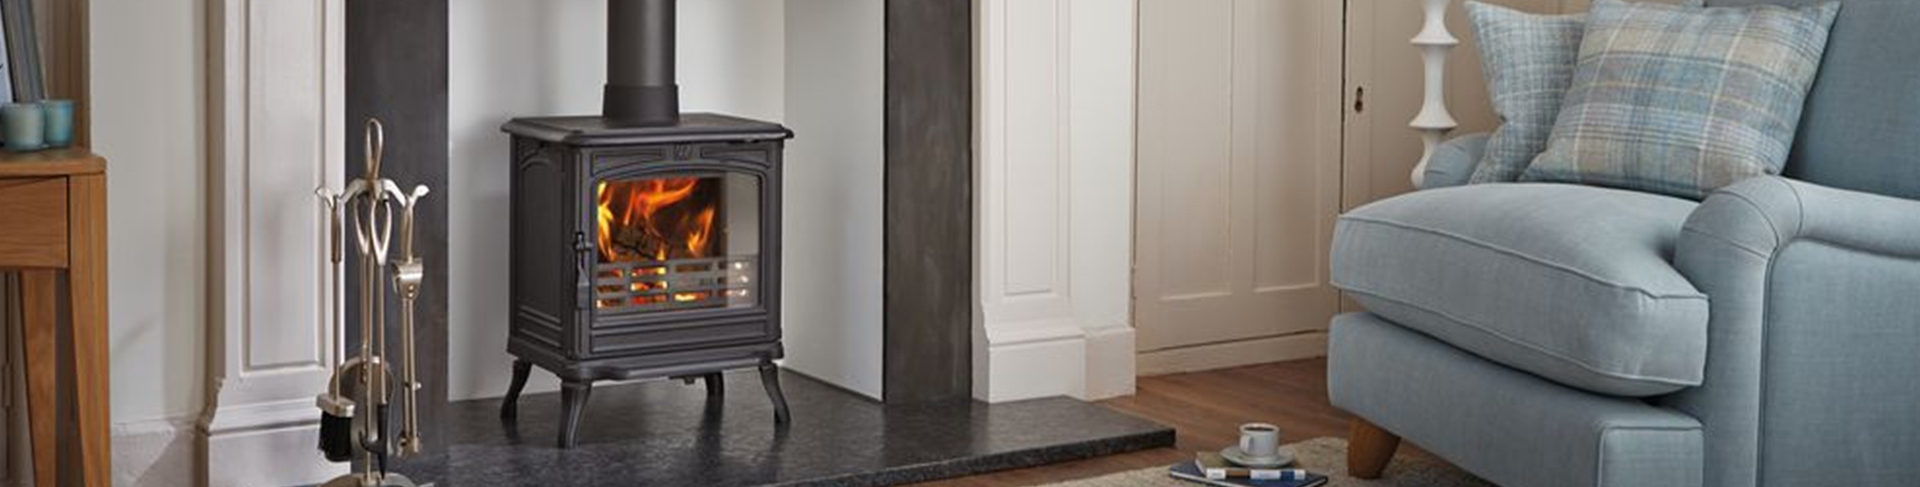 Free Standing Wood Burning Fireplace Luxury the London Fireplaces